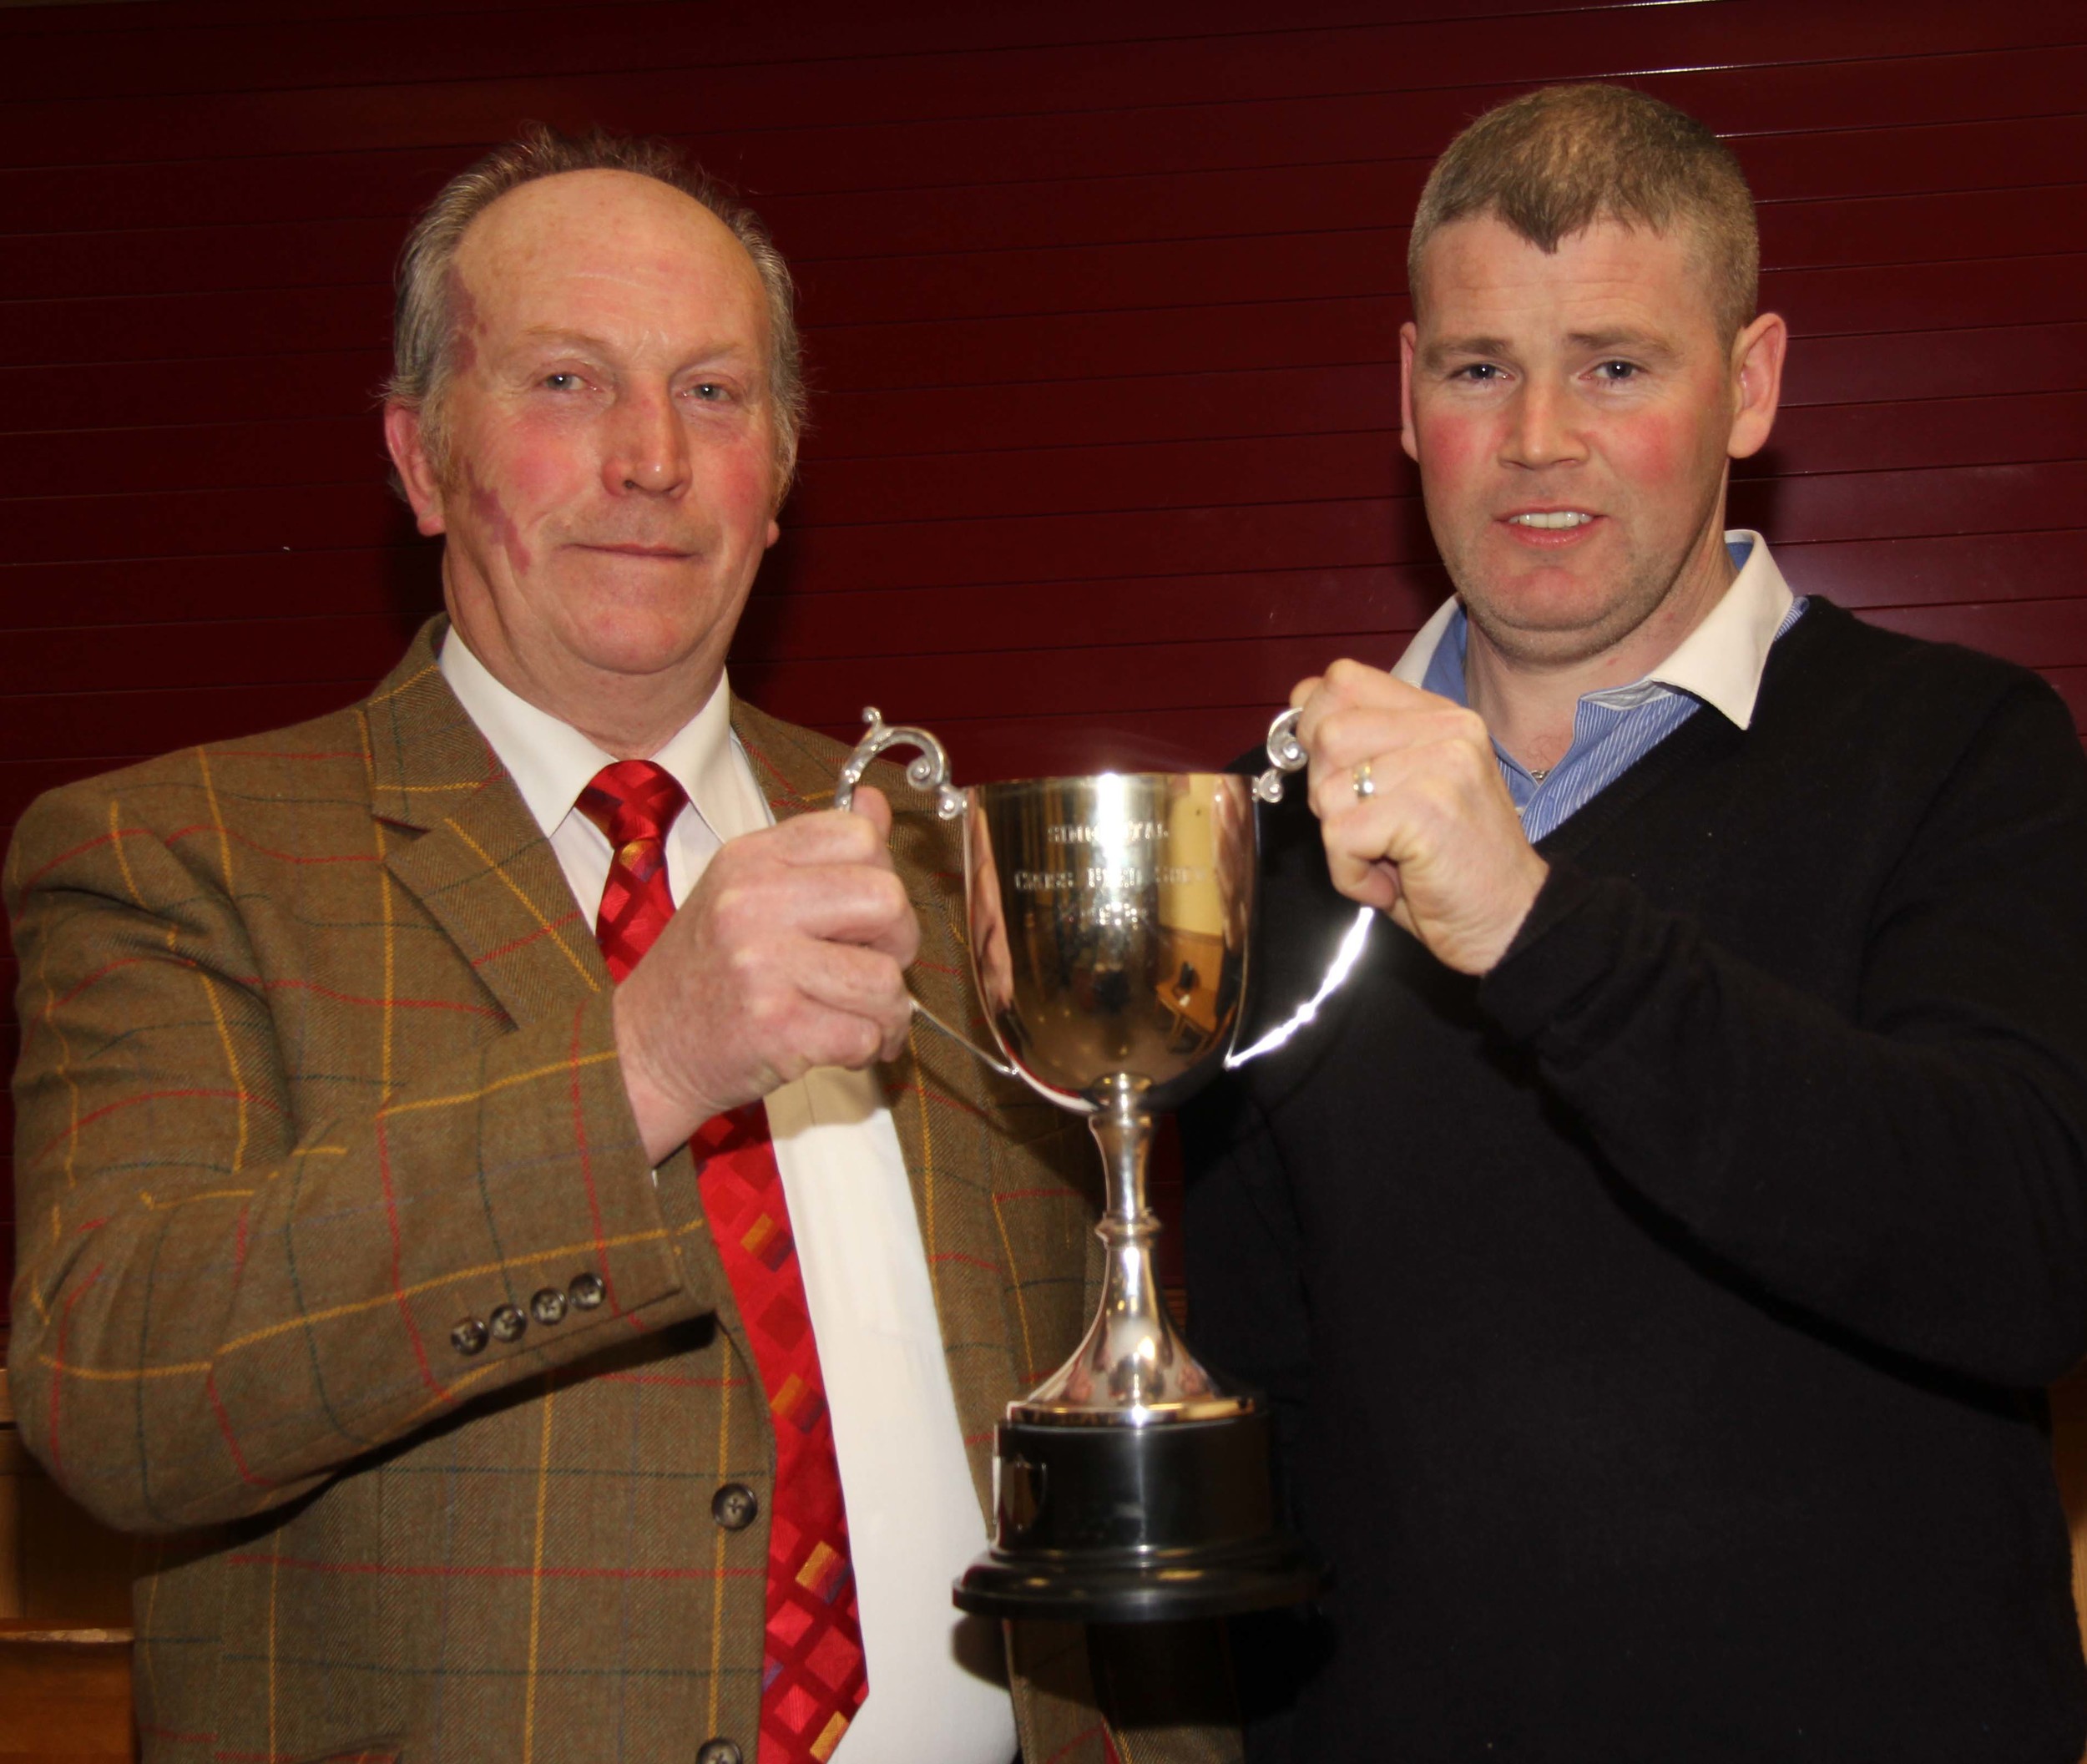 Joe Wilson, Newry, won the Woodcraft Kitchens Junior Heifer Derby. He received his award from sponsor Eamon McCloskey.